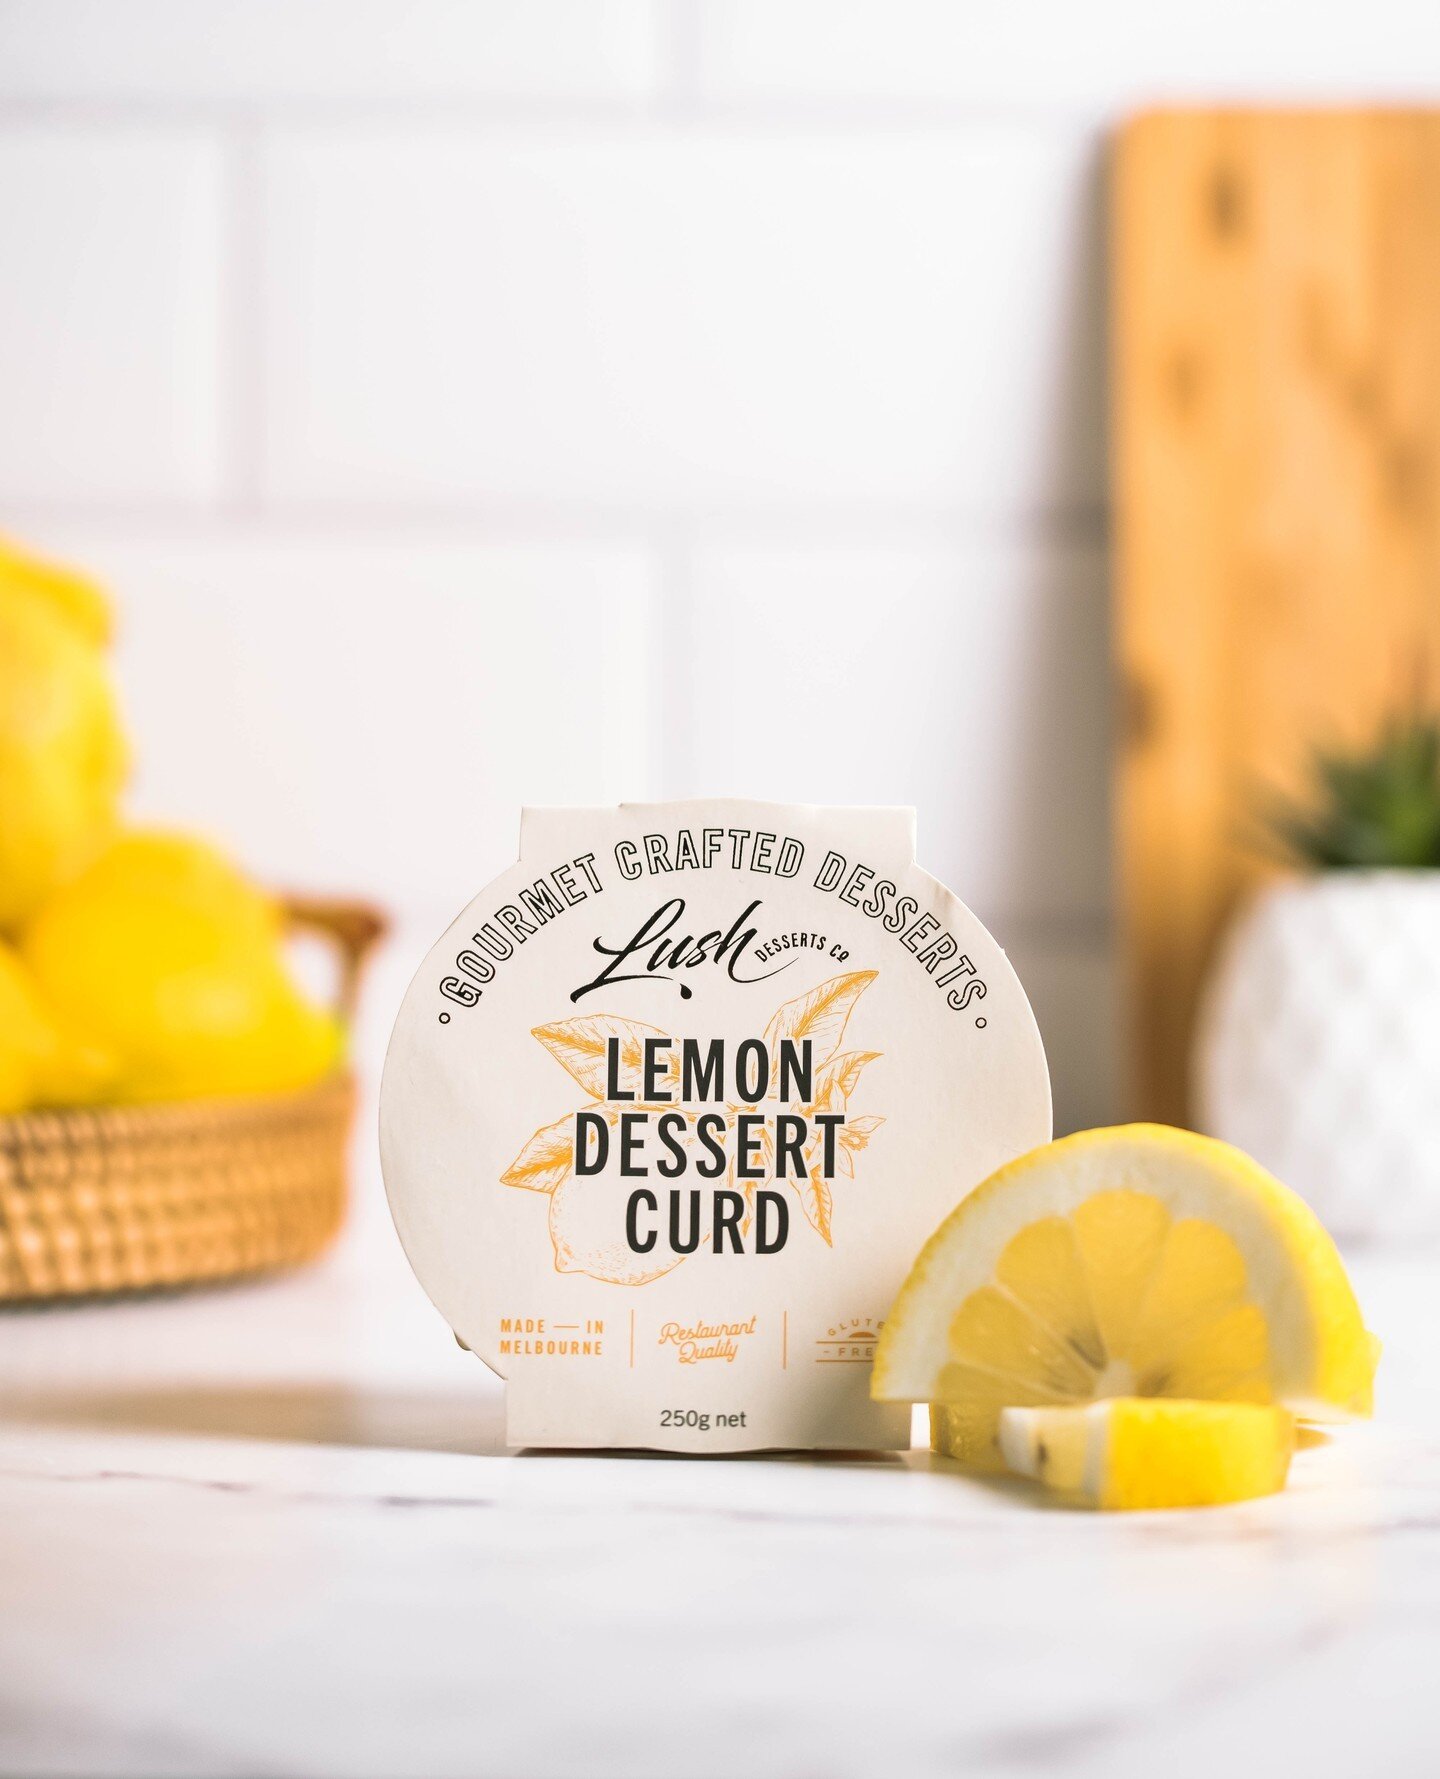 A creamy, tart lemon dessert curd with the perfect balance of sweet and sour. Great on its own as a luxurious sweet treat or as the hero ingredient in recipes such as lemon tarts and lemon meringue pie.⁠
⁠
Our Lemon Dessert Curd is available at selec